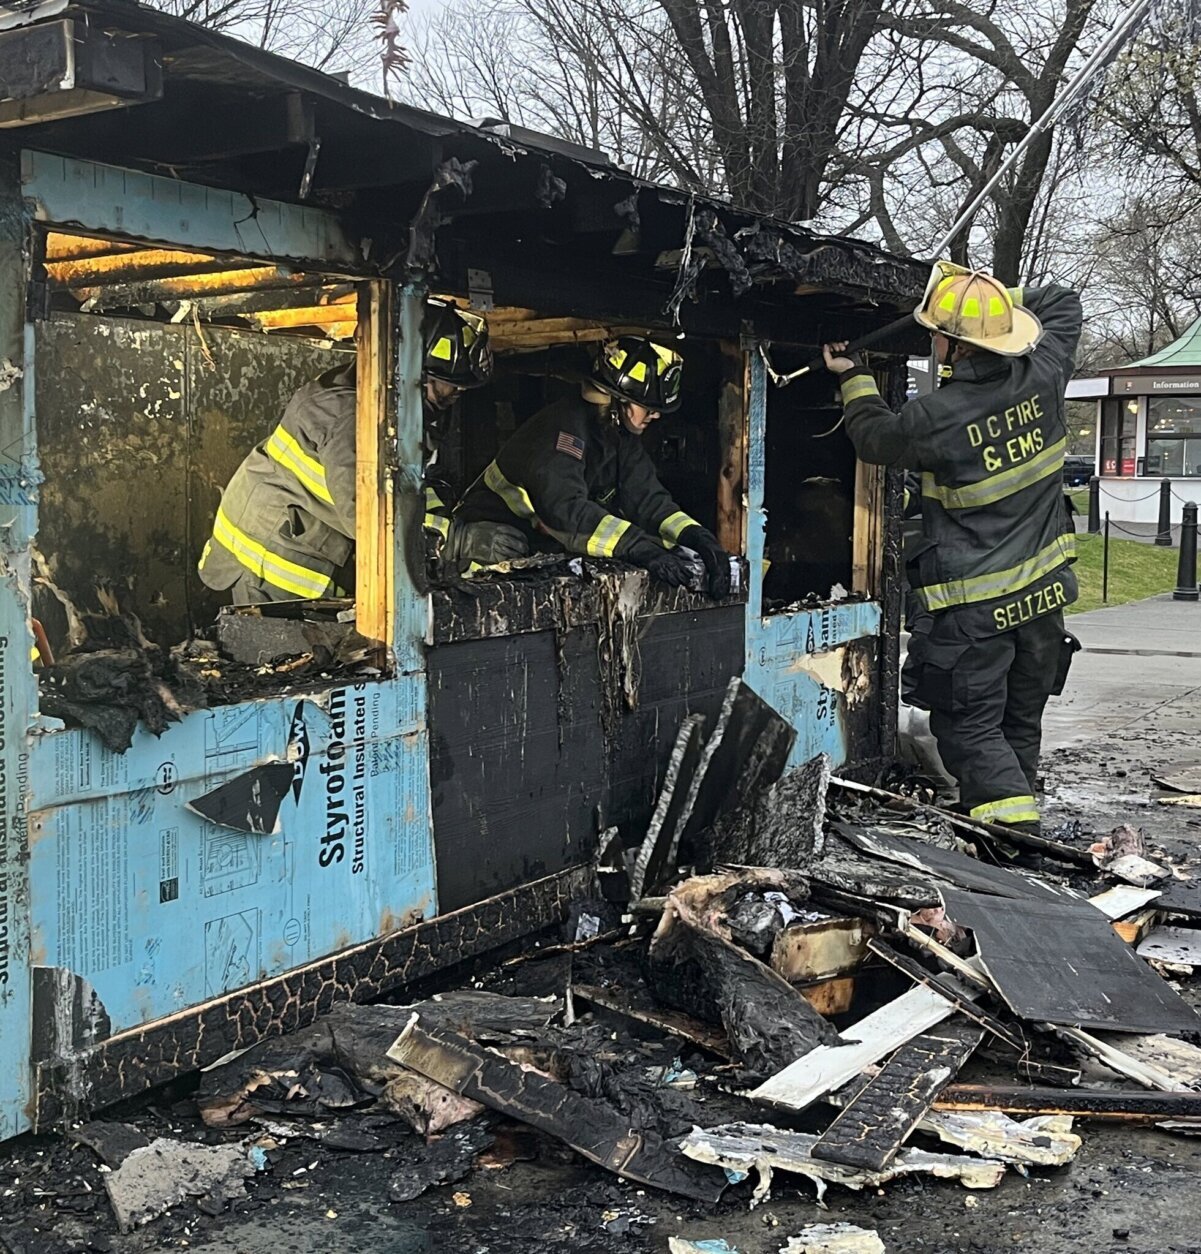 Fire damages concession kiosk near the Lincoln Memorial